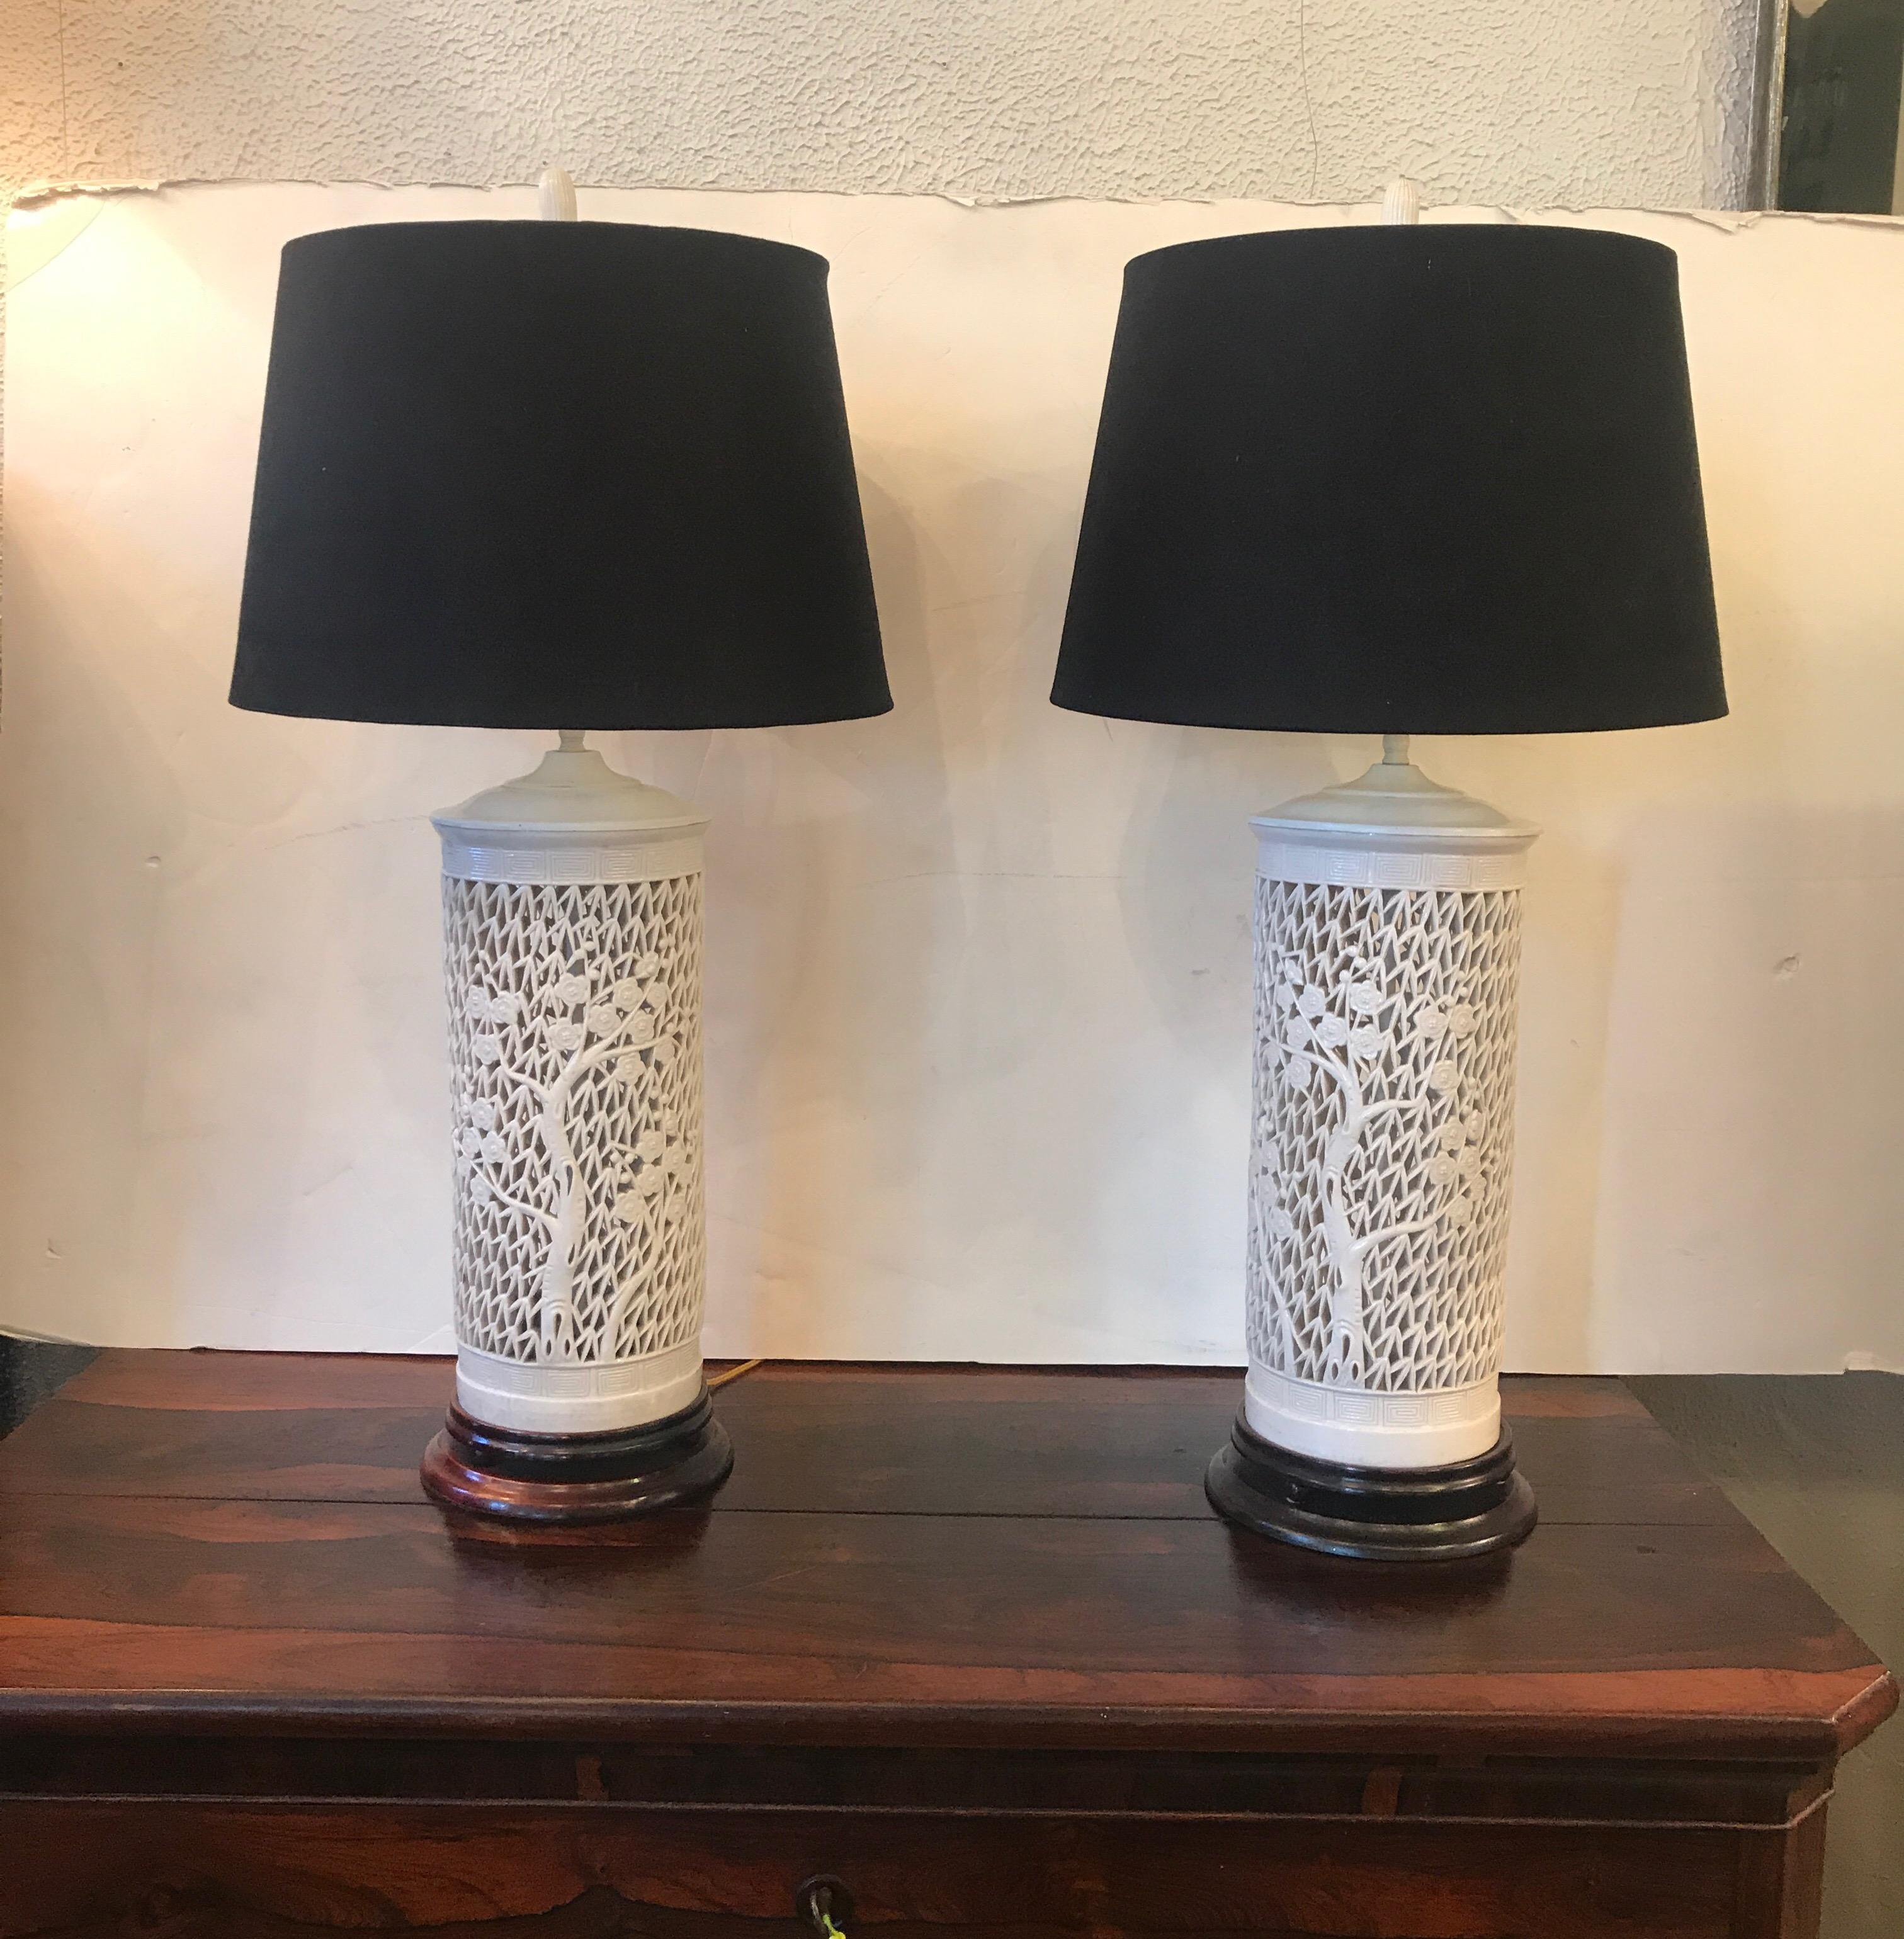 Stunning pair of Hollywood Regency Asian inspired reticulated Blanc de Chine table lamps, circa 1950s. This incredible pierced porcelain pair of lamps accentuated with foliate decoration is mounted on an ebonized base and wired with brass fittings.